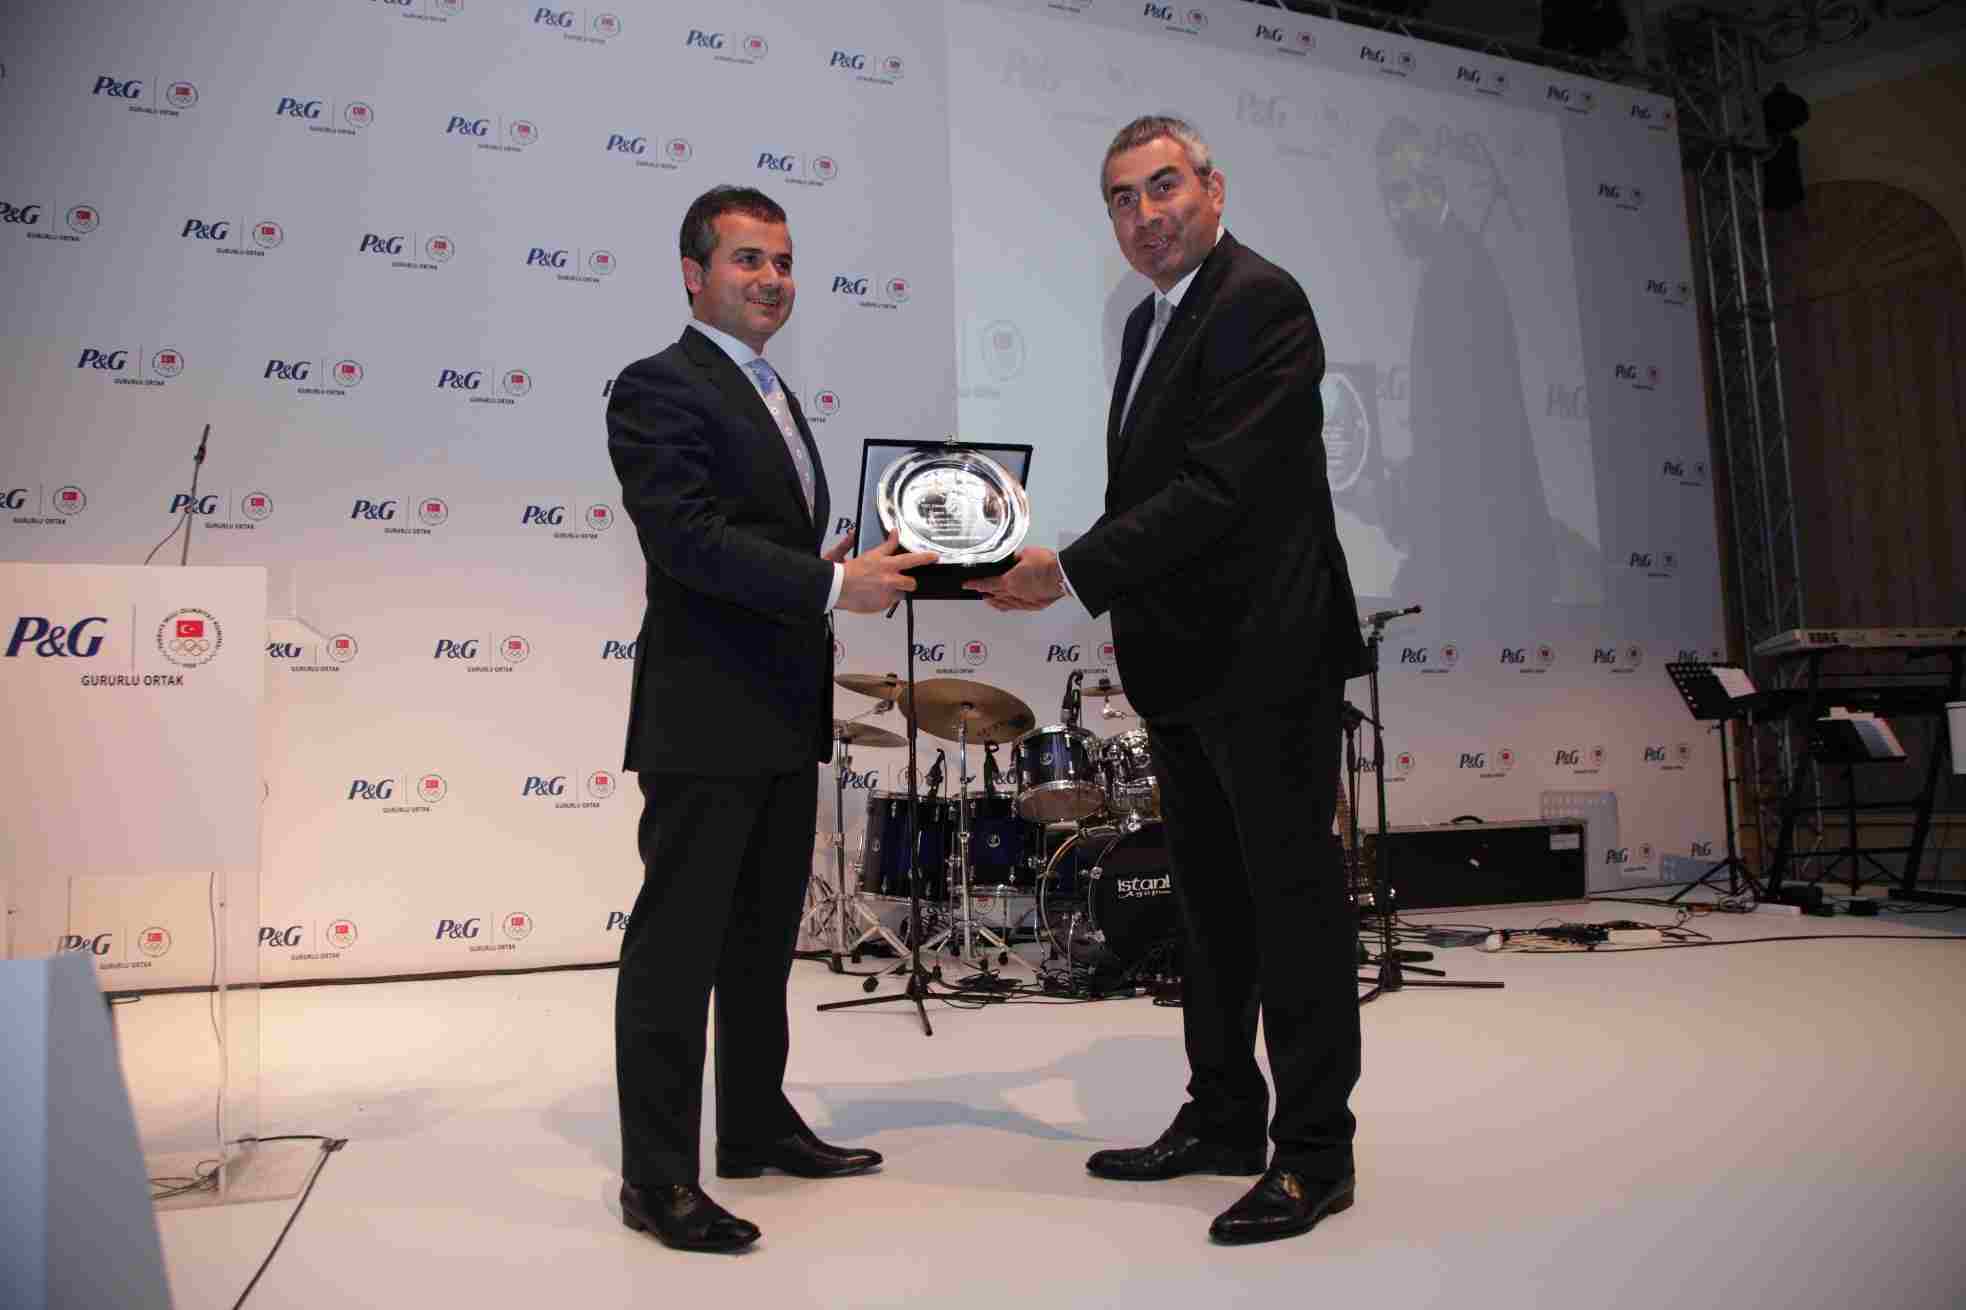 Ugur Erdener_presents_Suat_Kl_with_a_plate_thanking_him_for_his_support_of_the_NOC_and_the_Istanbul_2020_bid_May_9_2012